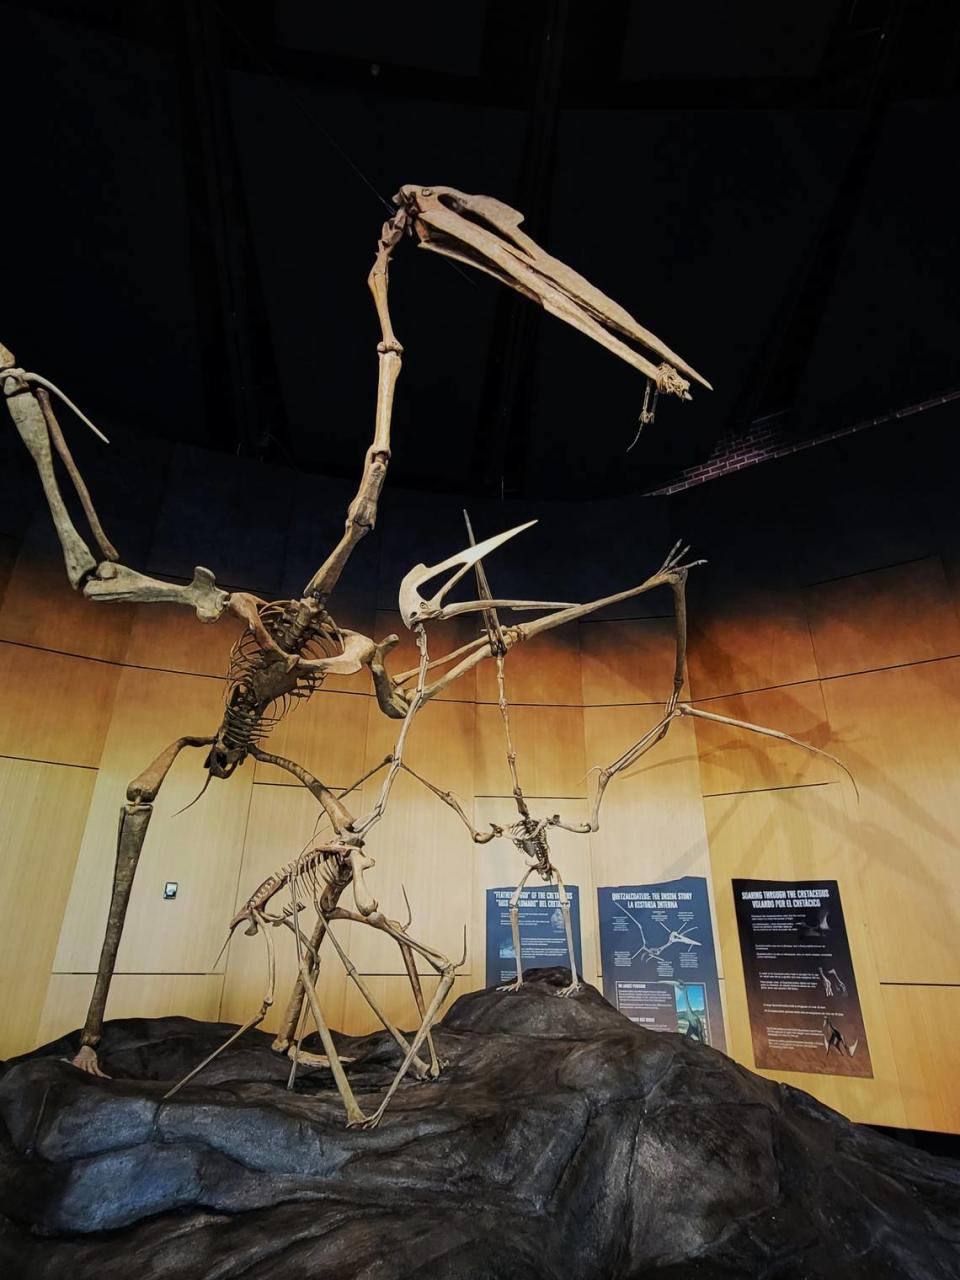 The Quetzalcoatlus, one of the largest flying animals ever, is in the Schiele Museum lobby and is a fossil cast similar to what visitors can expect in the new Hall of Dinosaurs when it is completed in 2026. It stands 18 feet tall with a 30-foot wingspan.